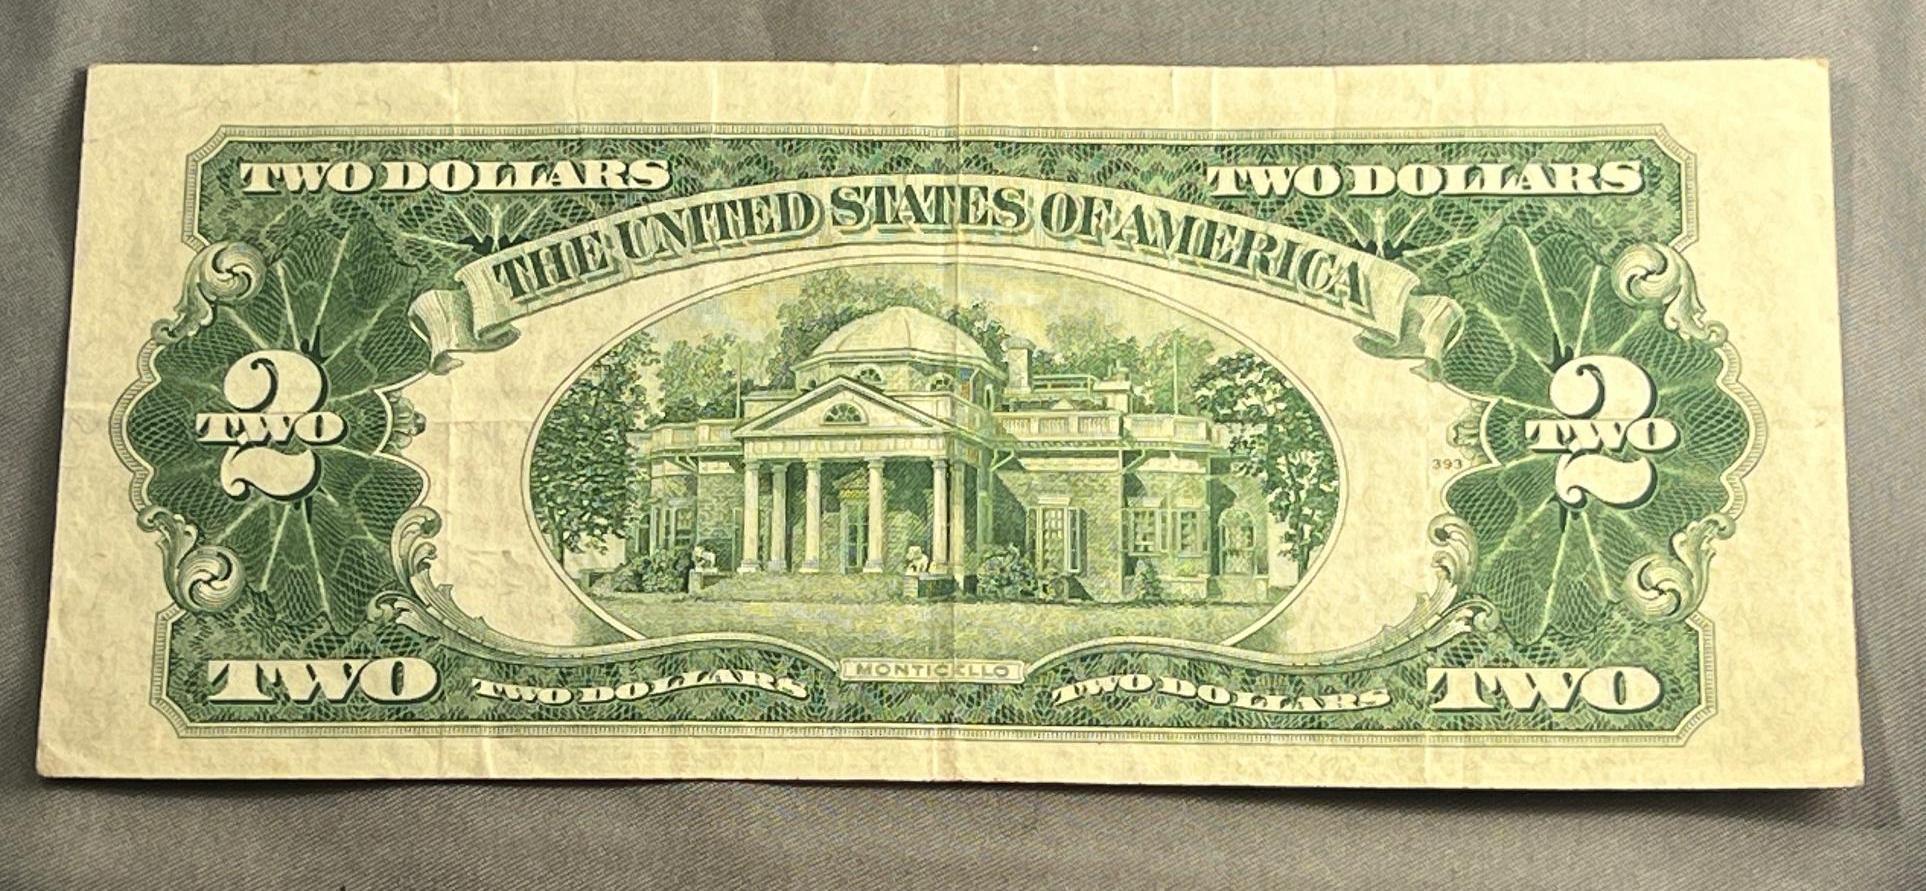 1953A $2.00 Red Seal Star US Note